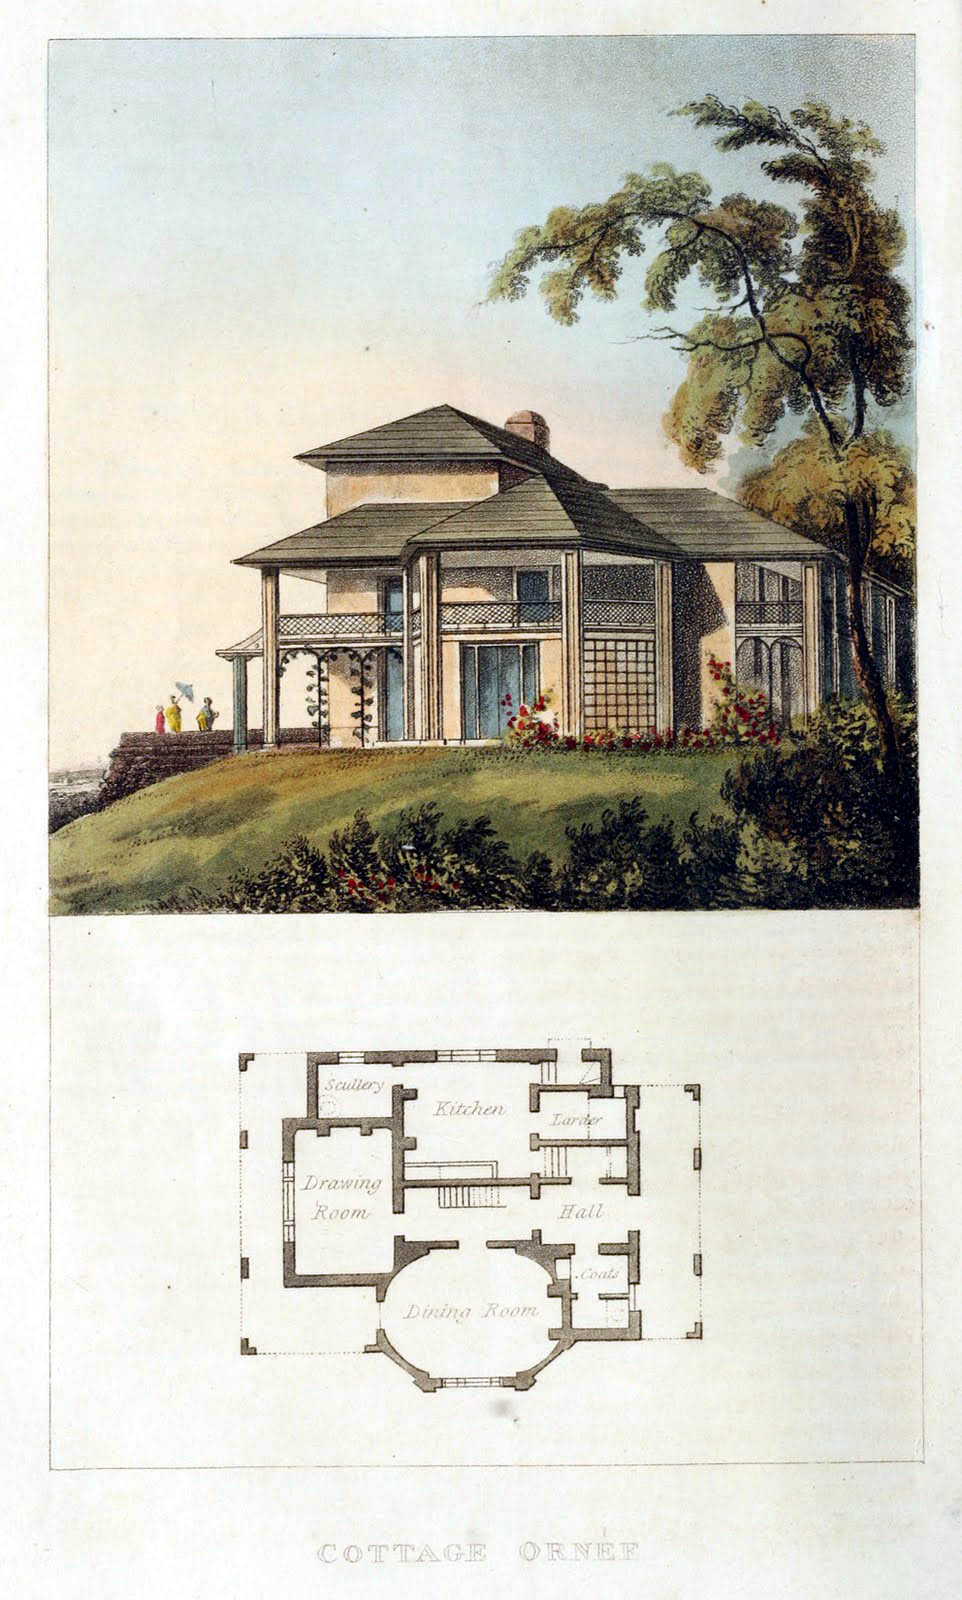 Ackermann's Repository - 1816 Cottage Ornee plate 25